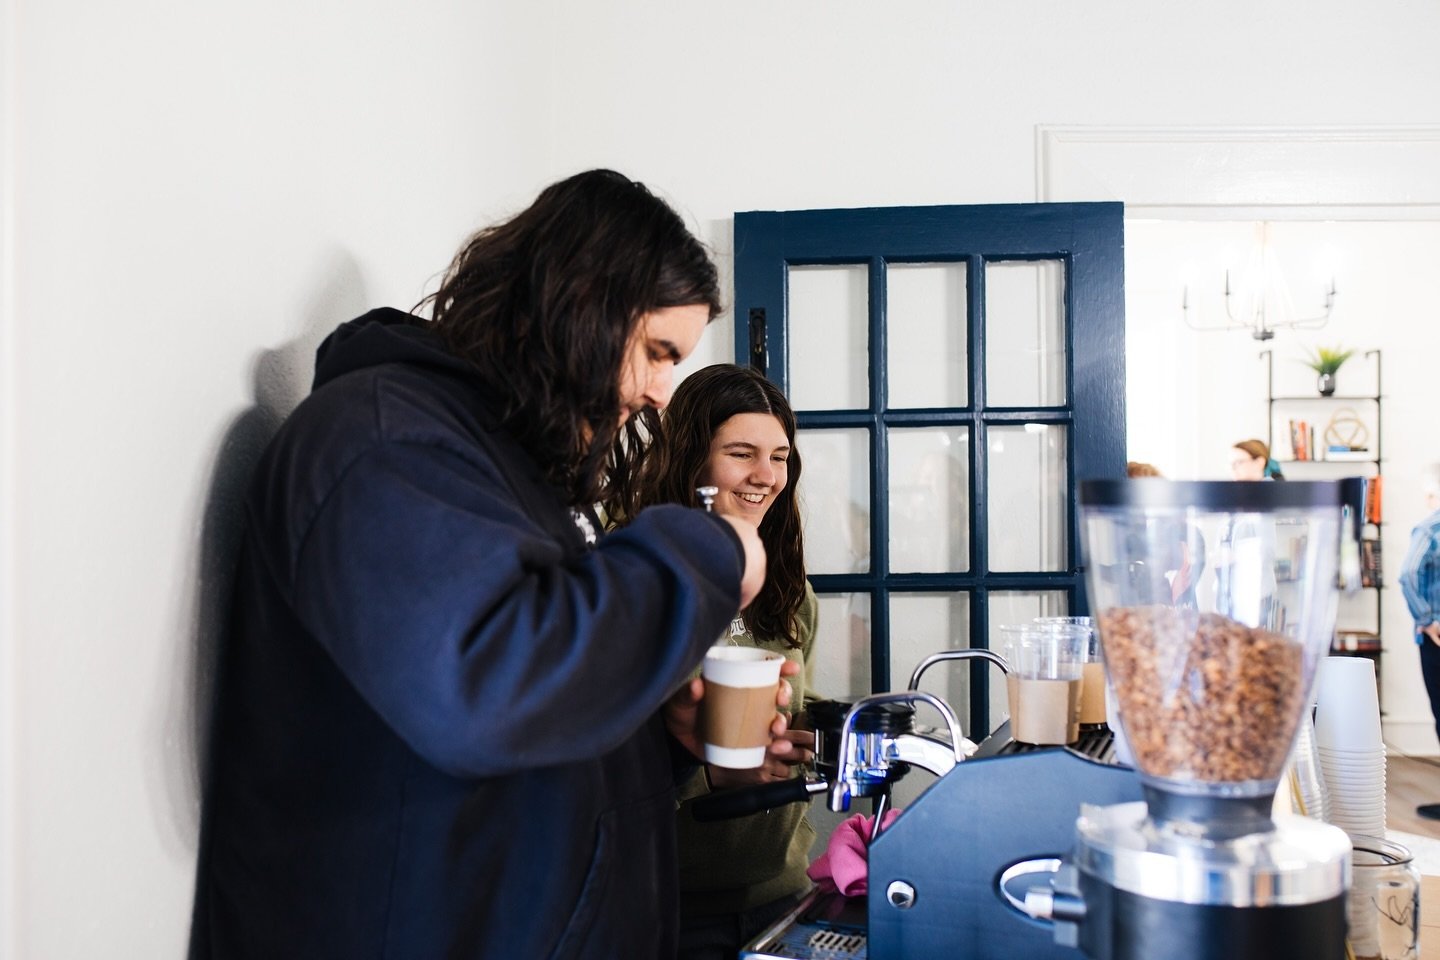 Whether it&rsquo;s a leadership retreat, corporate event, staff luncheon, wedding, and more, good coffee makes an impact. As soon as we grind those first few shots, the aroma transforms your space into a coffee shop - guests perk up, a line starts fo